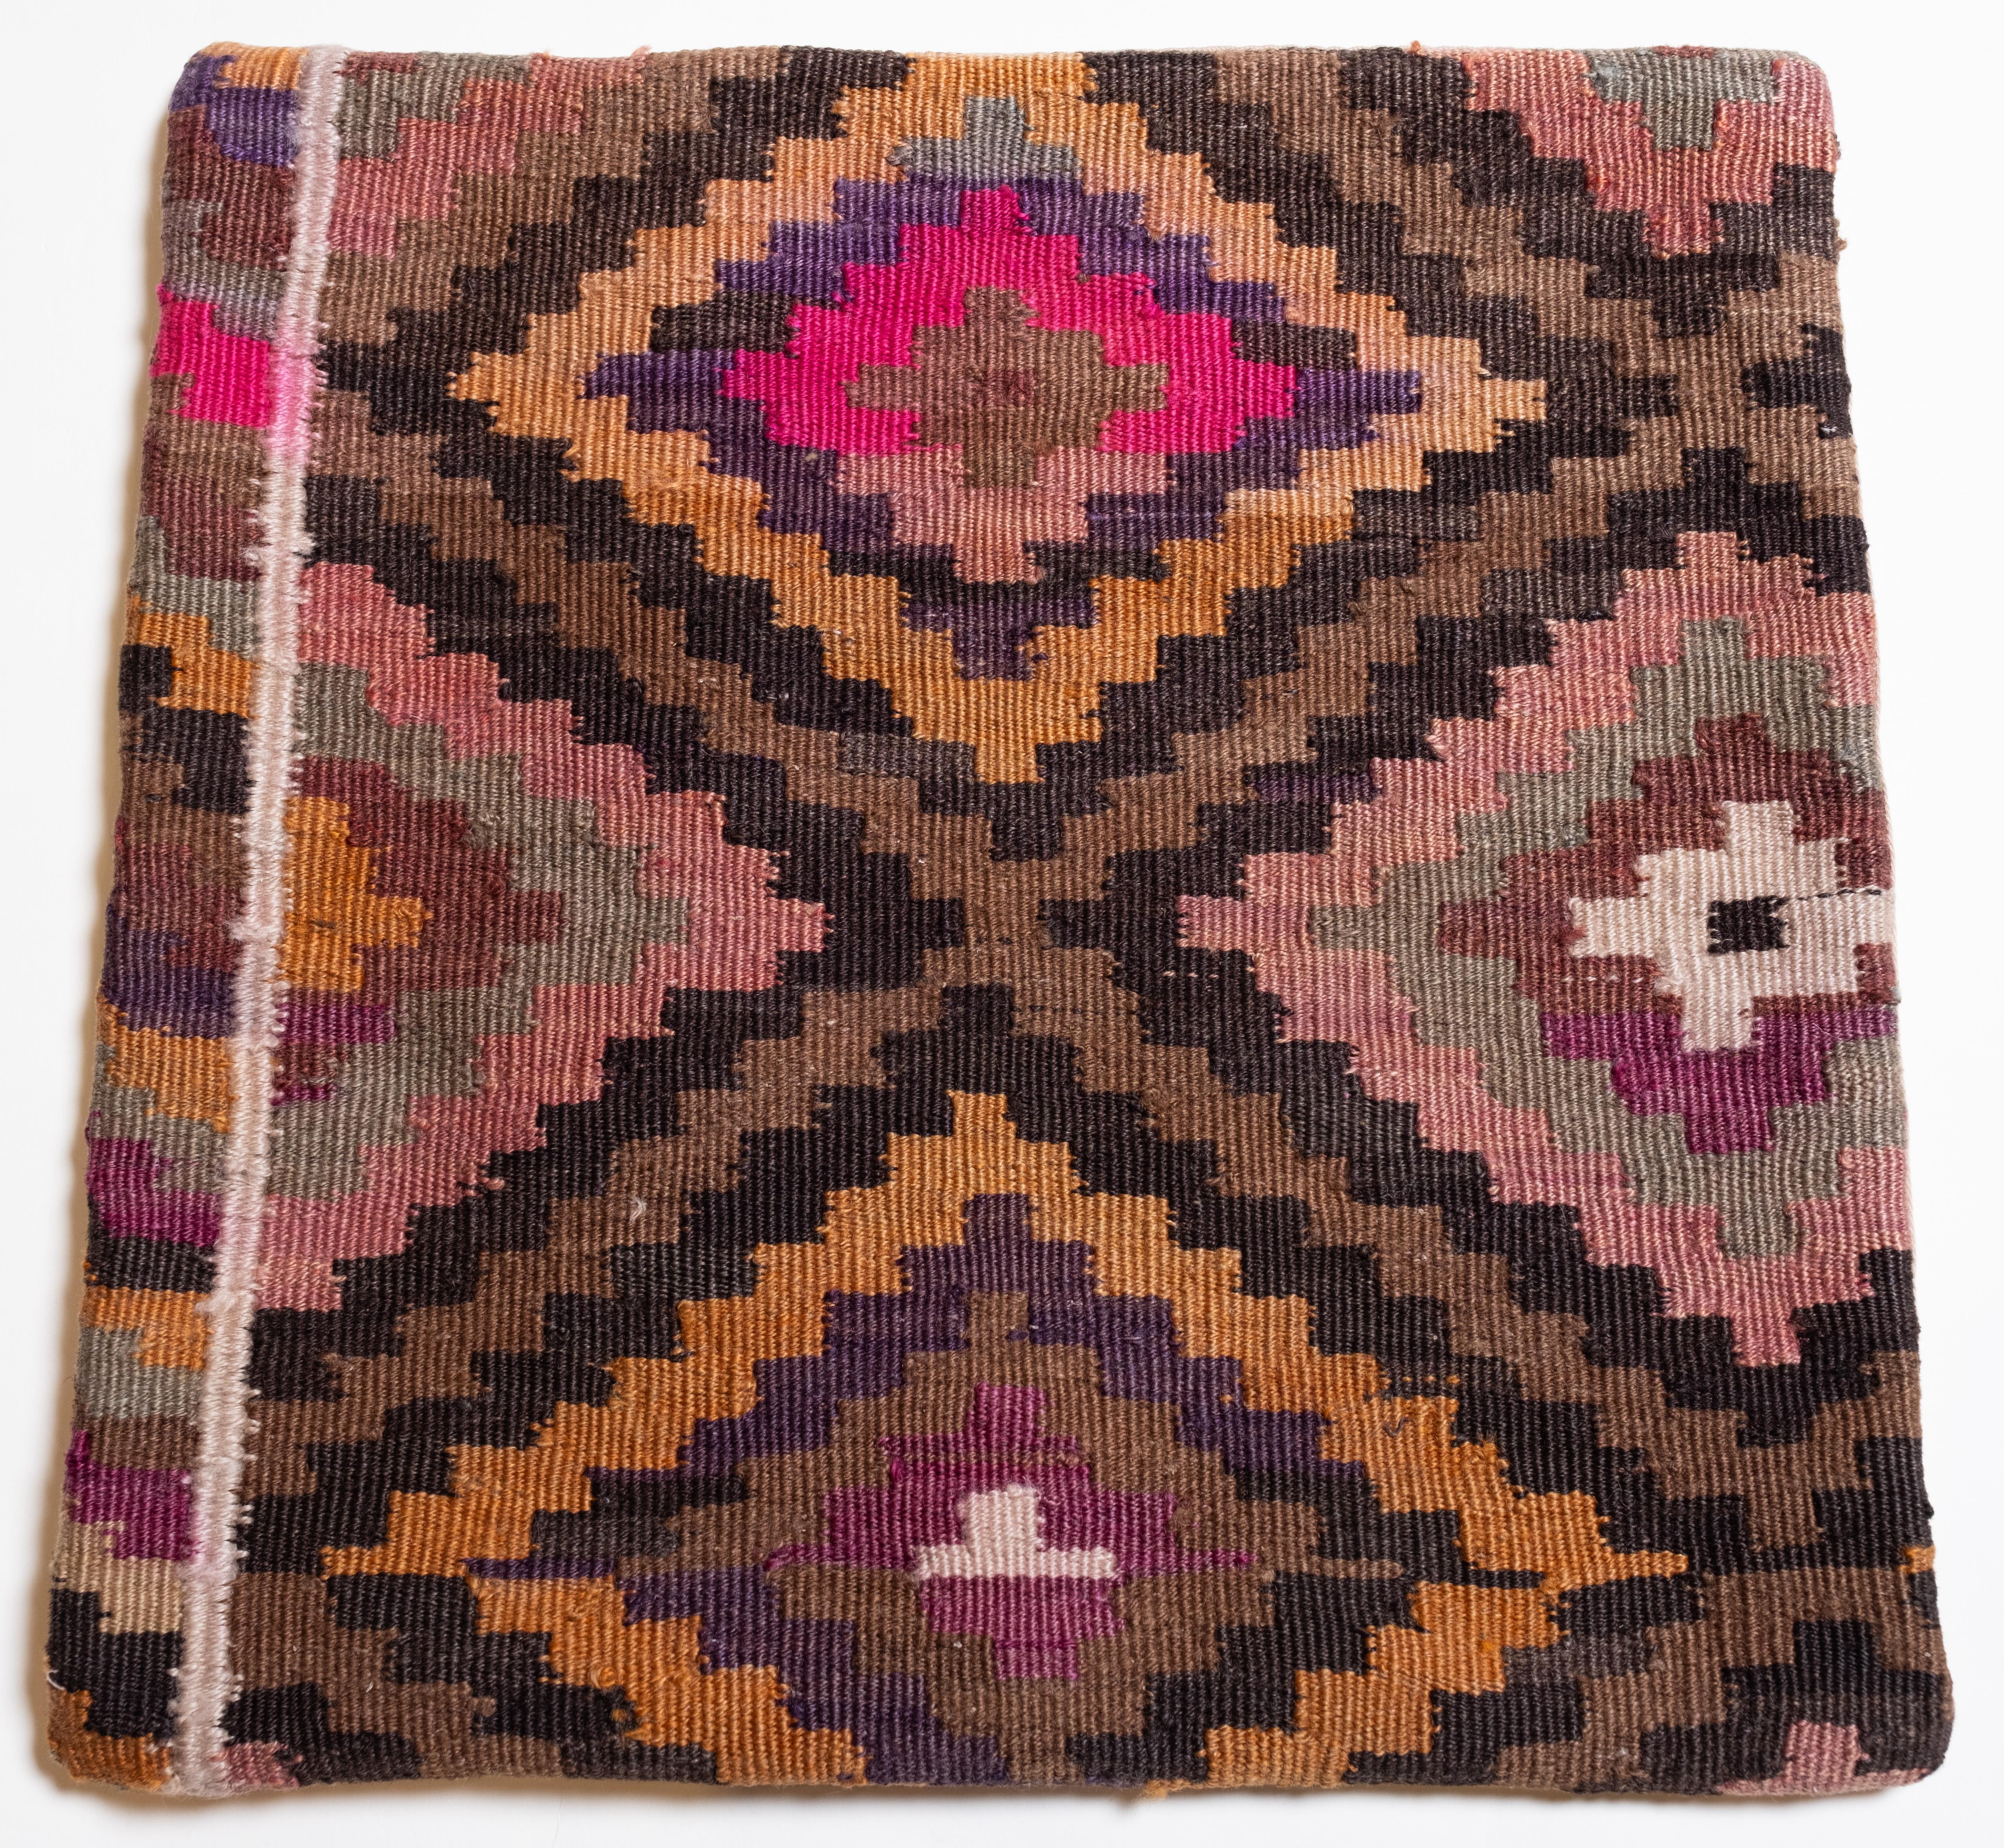 We made a cushion cover using the undamaged parts of the precious and high-quality old & antique kilims that cannot be repaired. Like a painting, a part of the scenery is cut out from a kilim, and even several covers cut out from the same kilim show